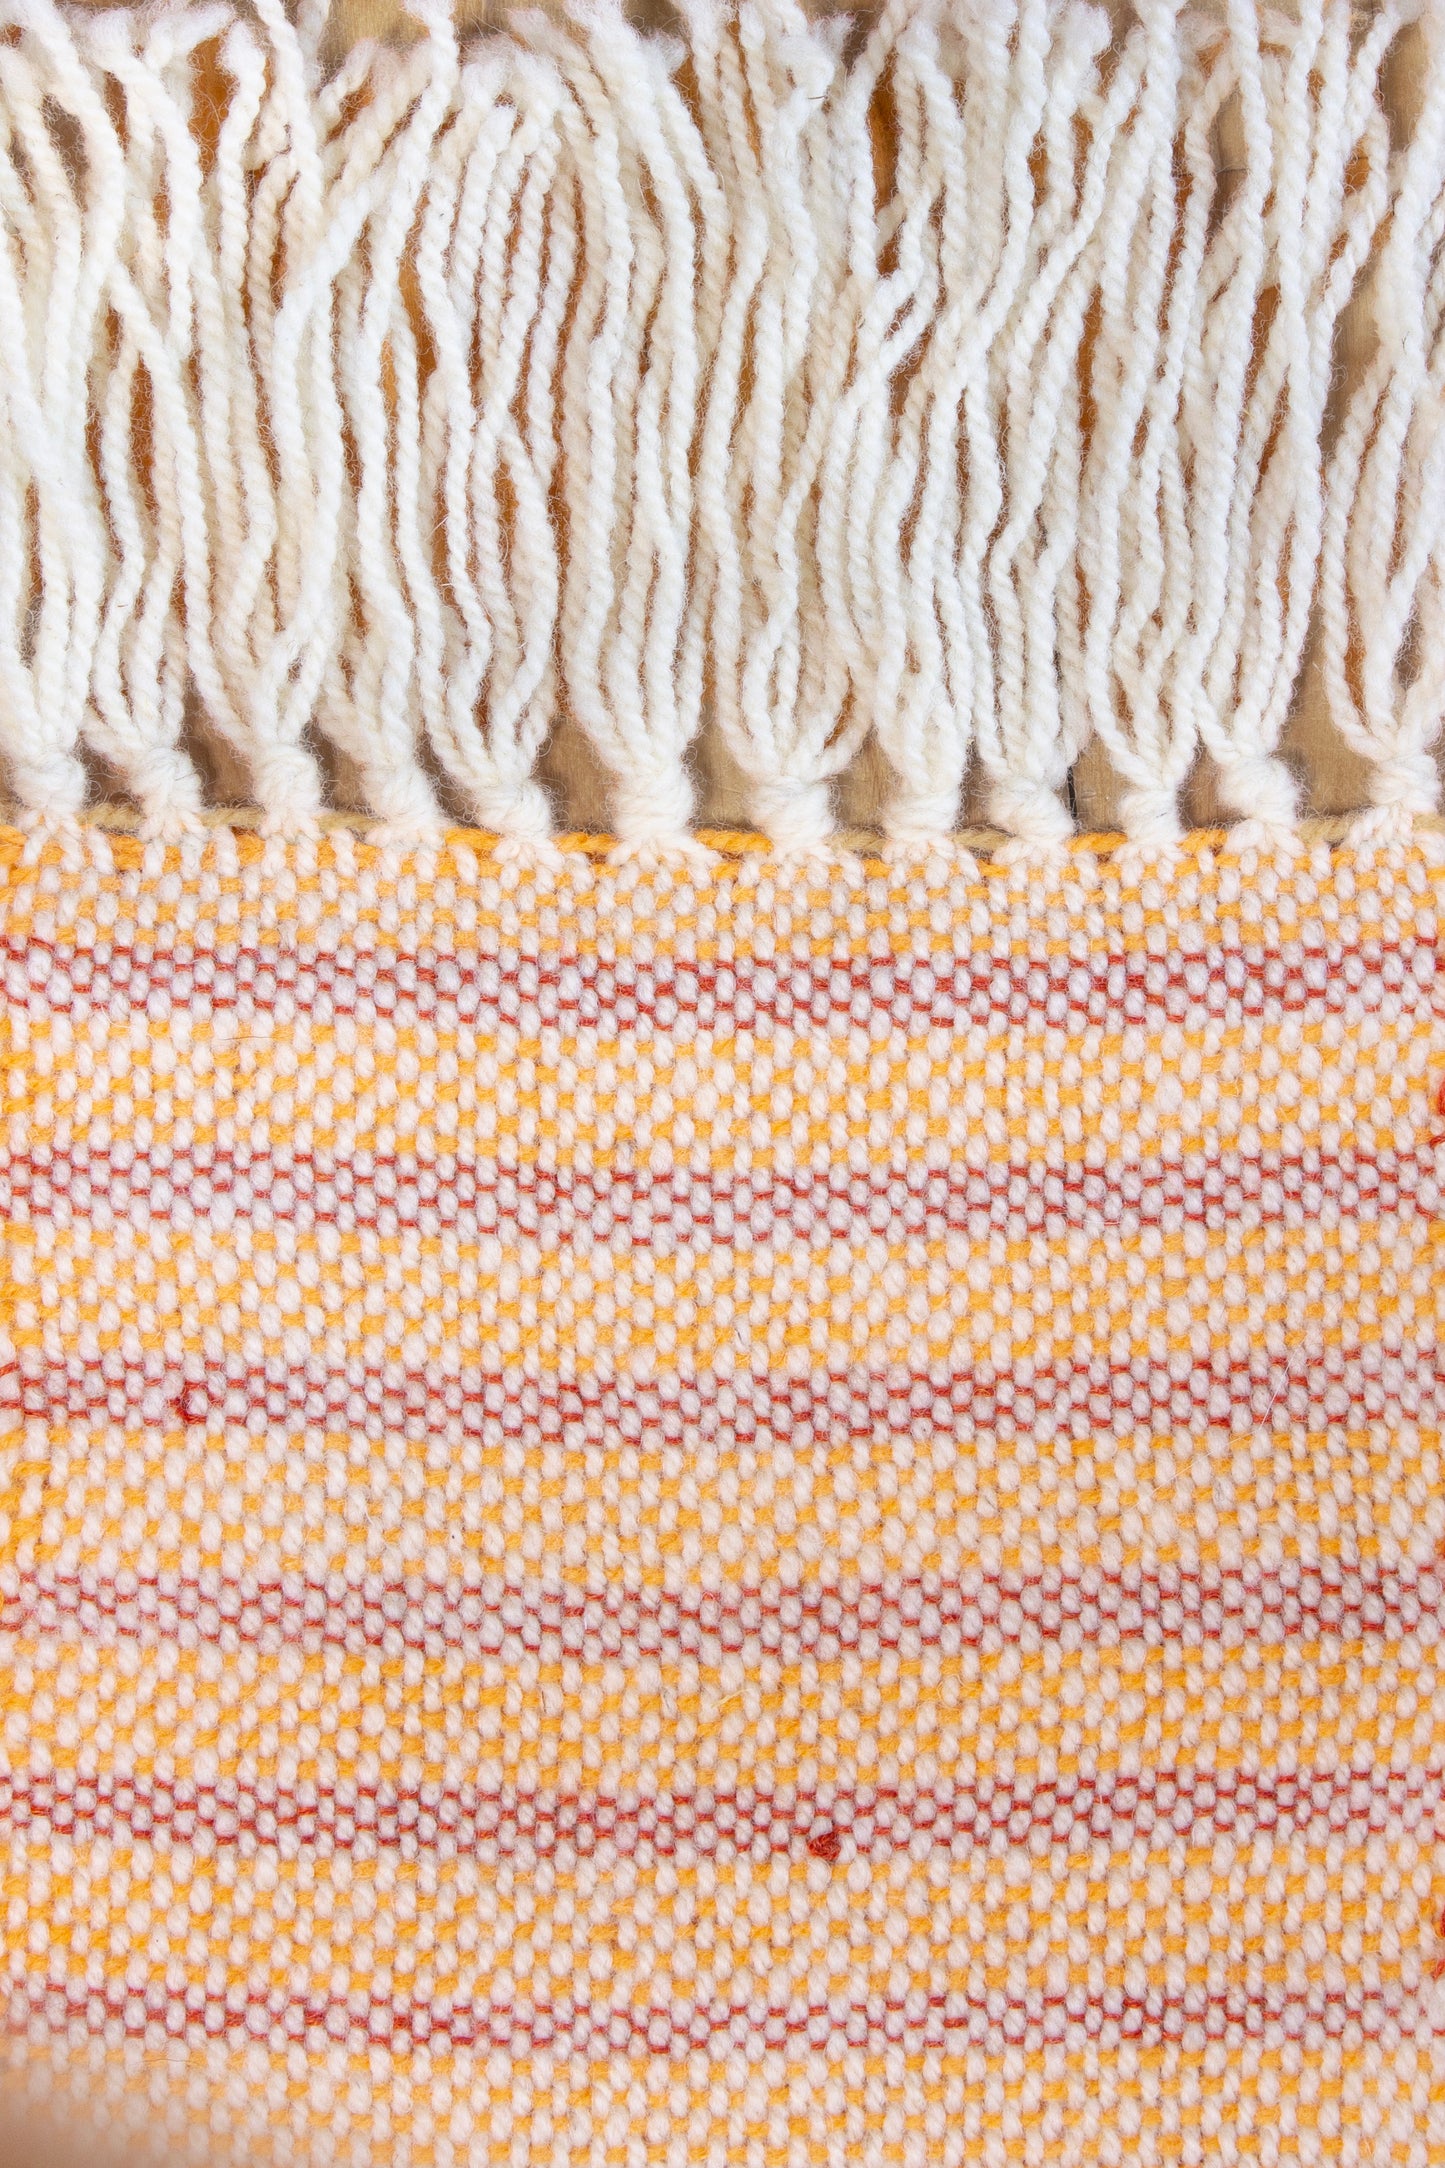 Wool scarf, striped orange, white, marbled orange, handmade, natural fibres, undyed white, locally sourced, reclaimed loom waste, woven in Canada